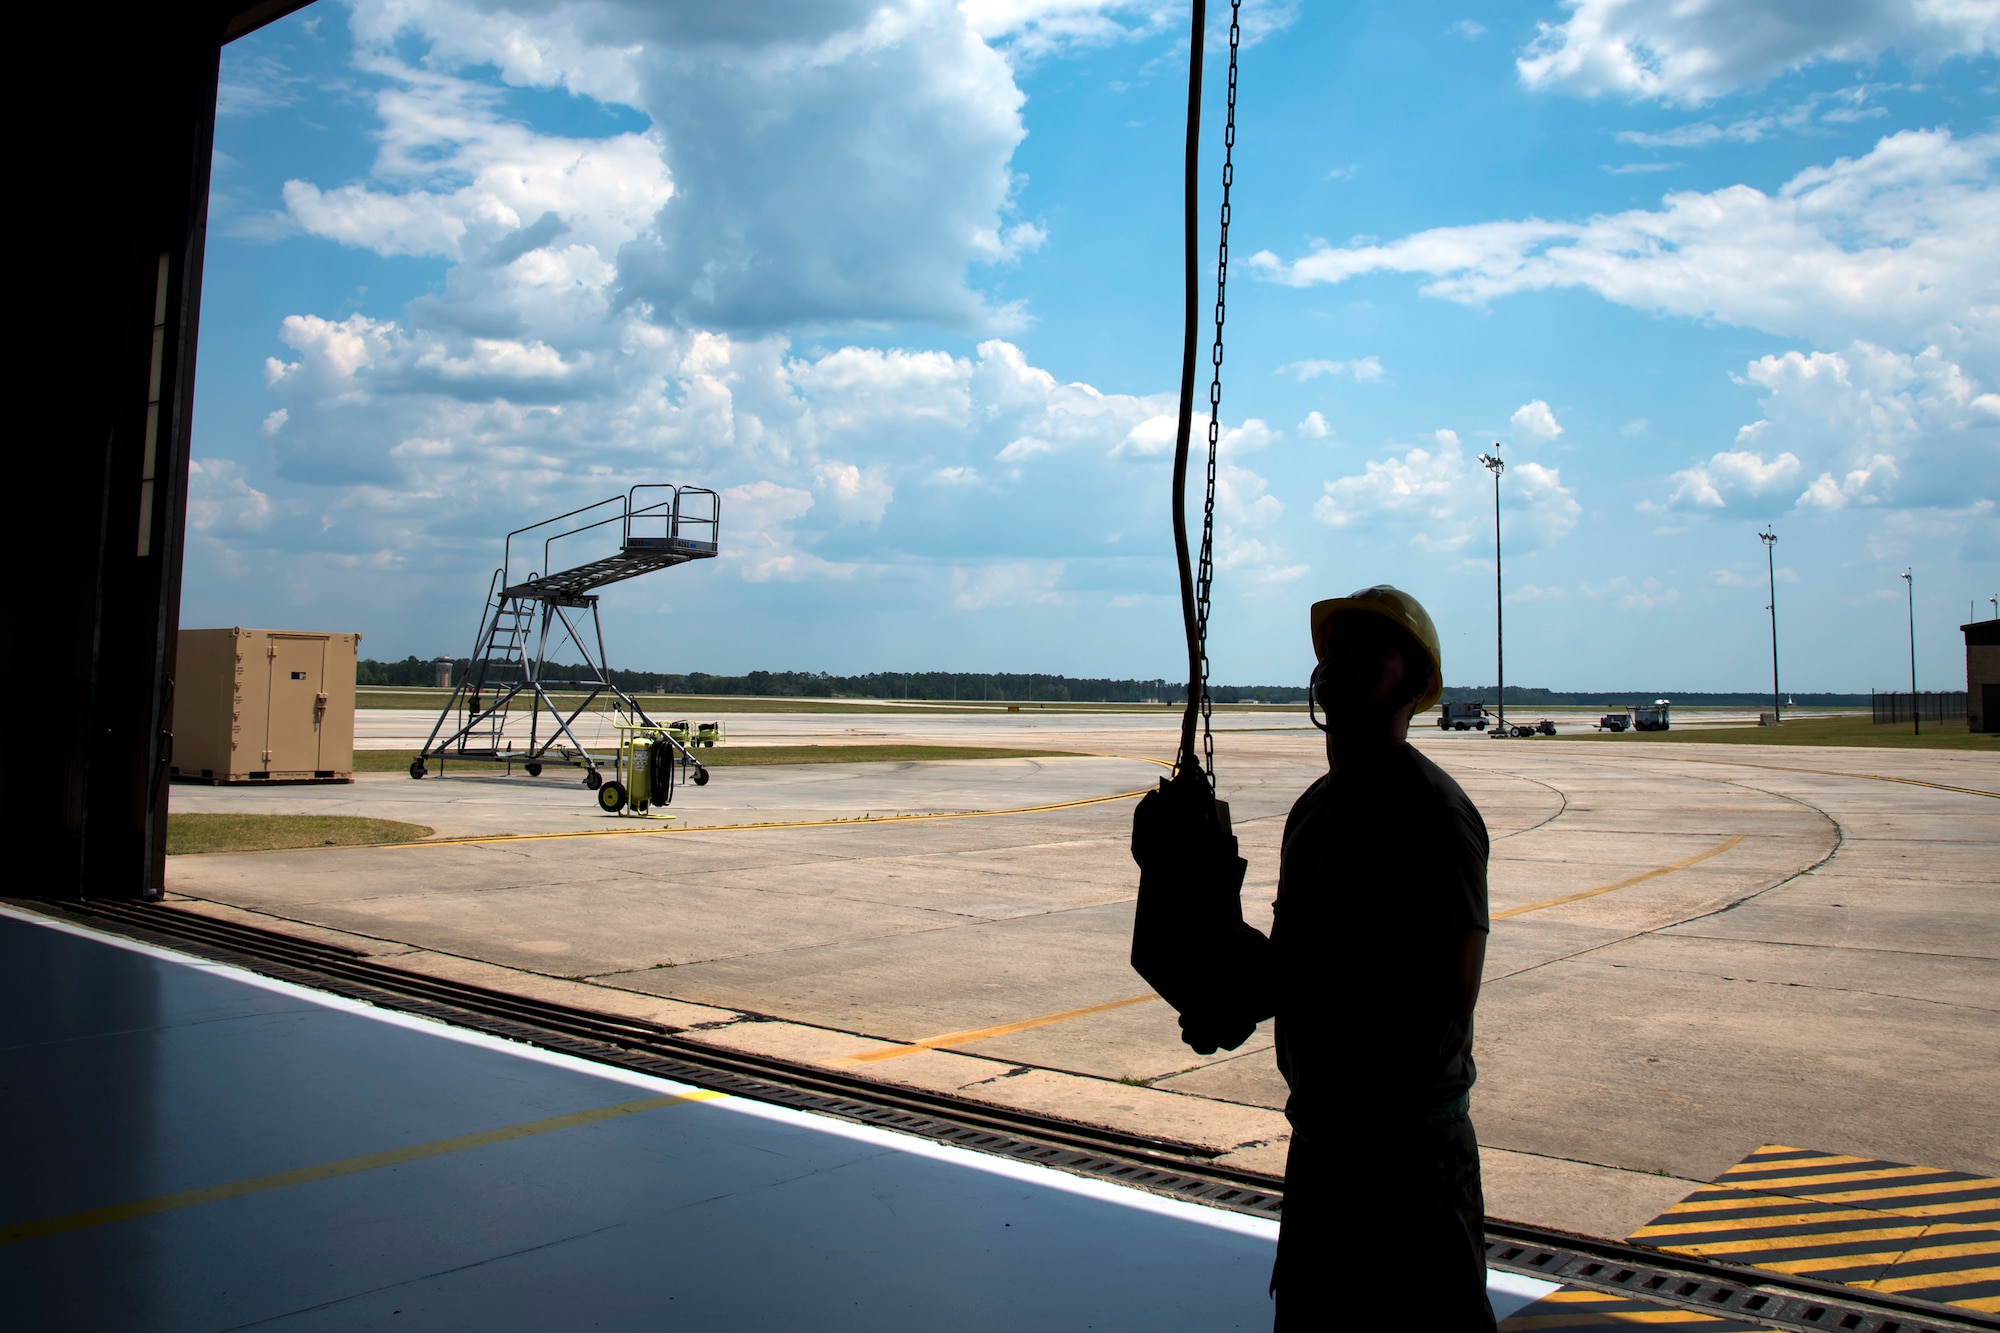 An Airman from the 723d Aircraft Maintenance Squadron (AMXS), operates a lift mechanism, May 10, 2018, at Moody Air Force Base, Ga. Airmen from the 723d AMXS along with machinists from the Corpus Christi Army Depot conducted a full-structural tear down and restoration on an HH-60G Pave Hawk. Once the aircraft was torn down, Airmen and the machinists performed repairs on all of its components prior to resembling it. (U.S. Air Force photo by Airman 1st Class Eugene Oliver)